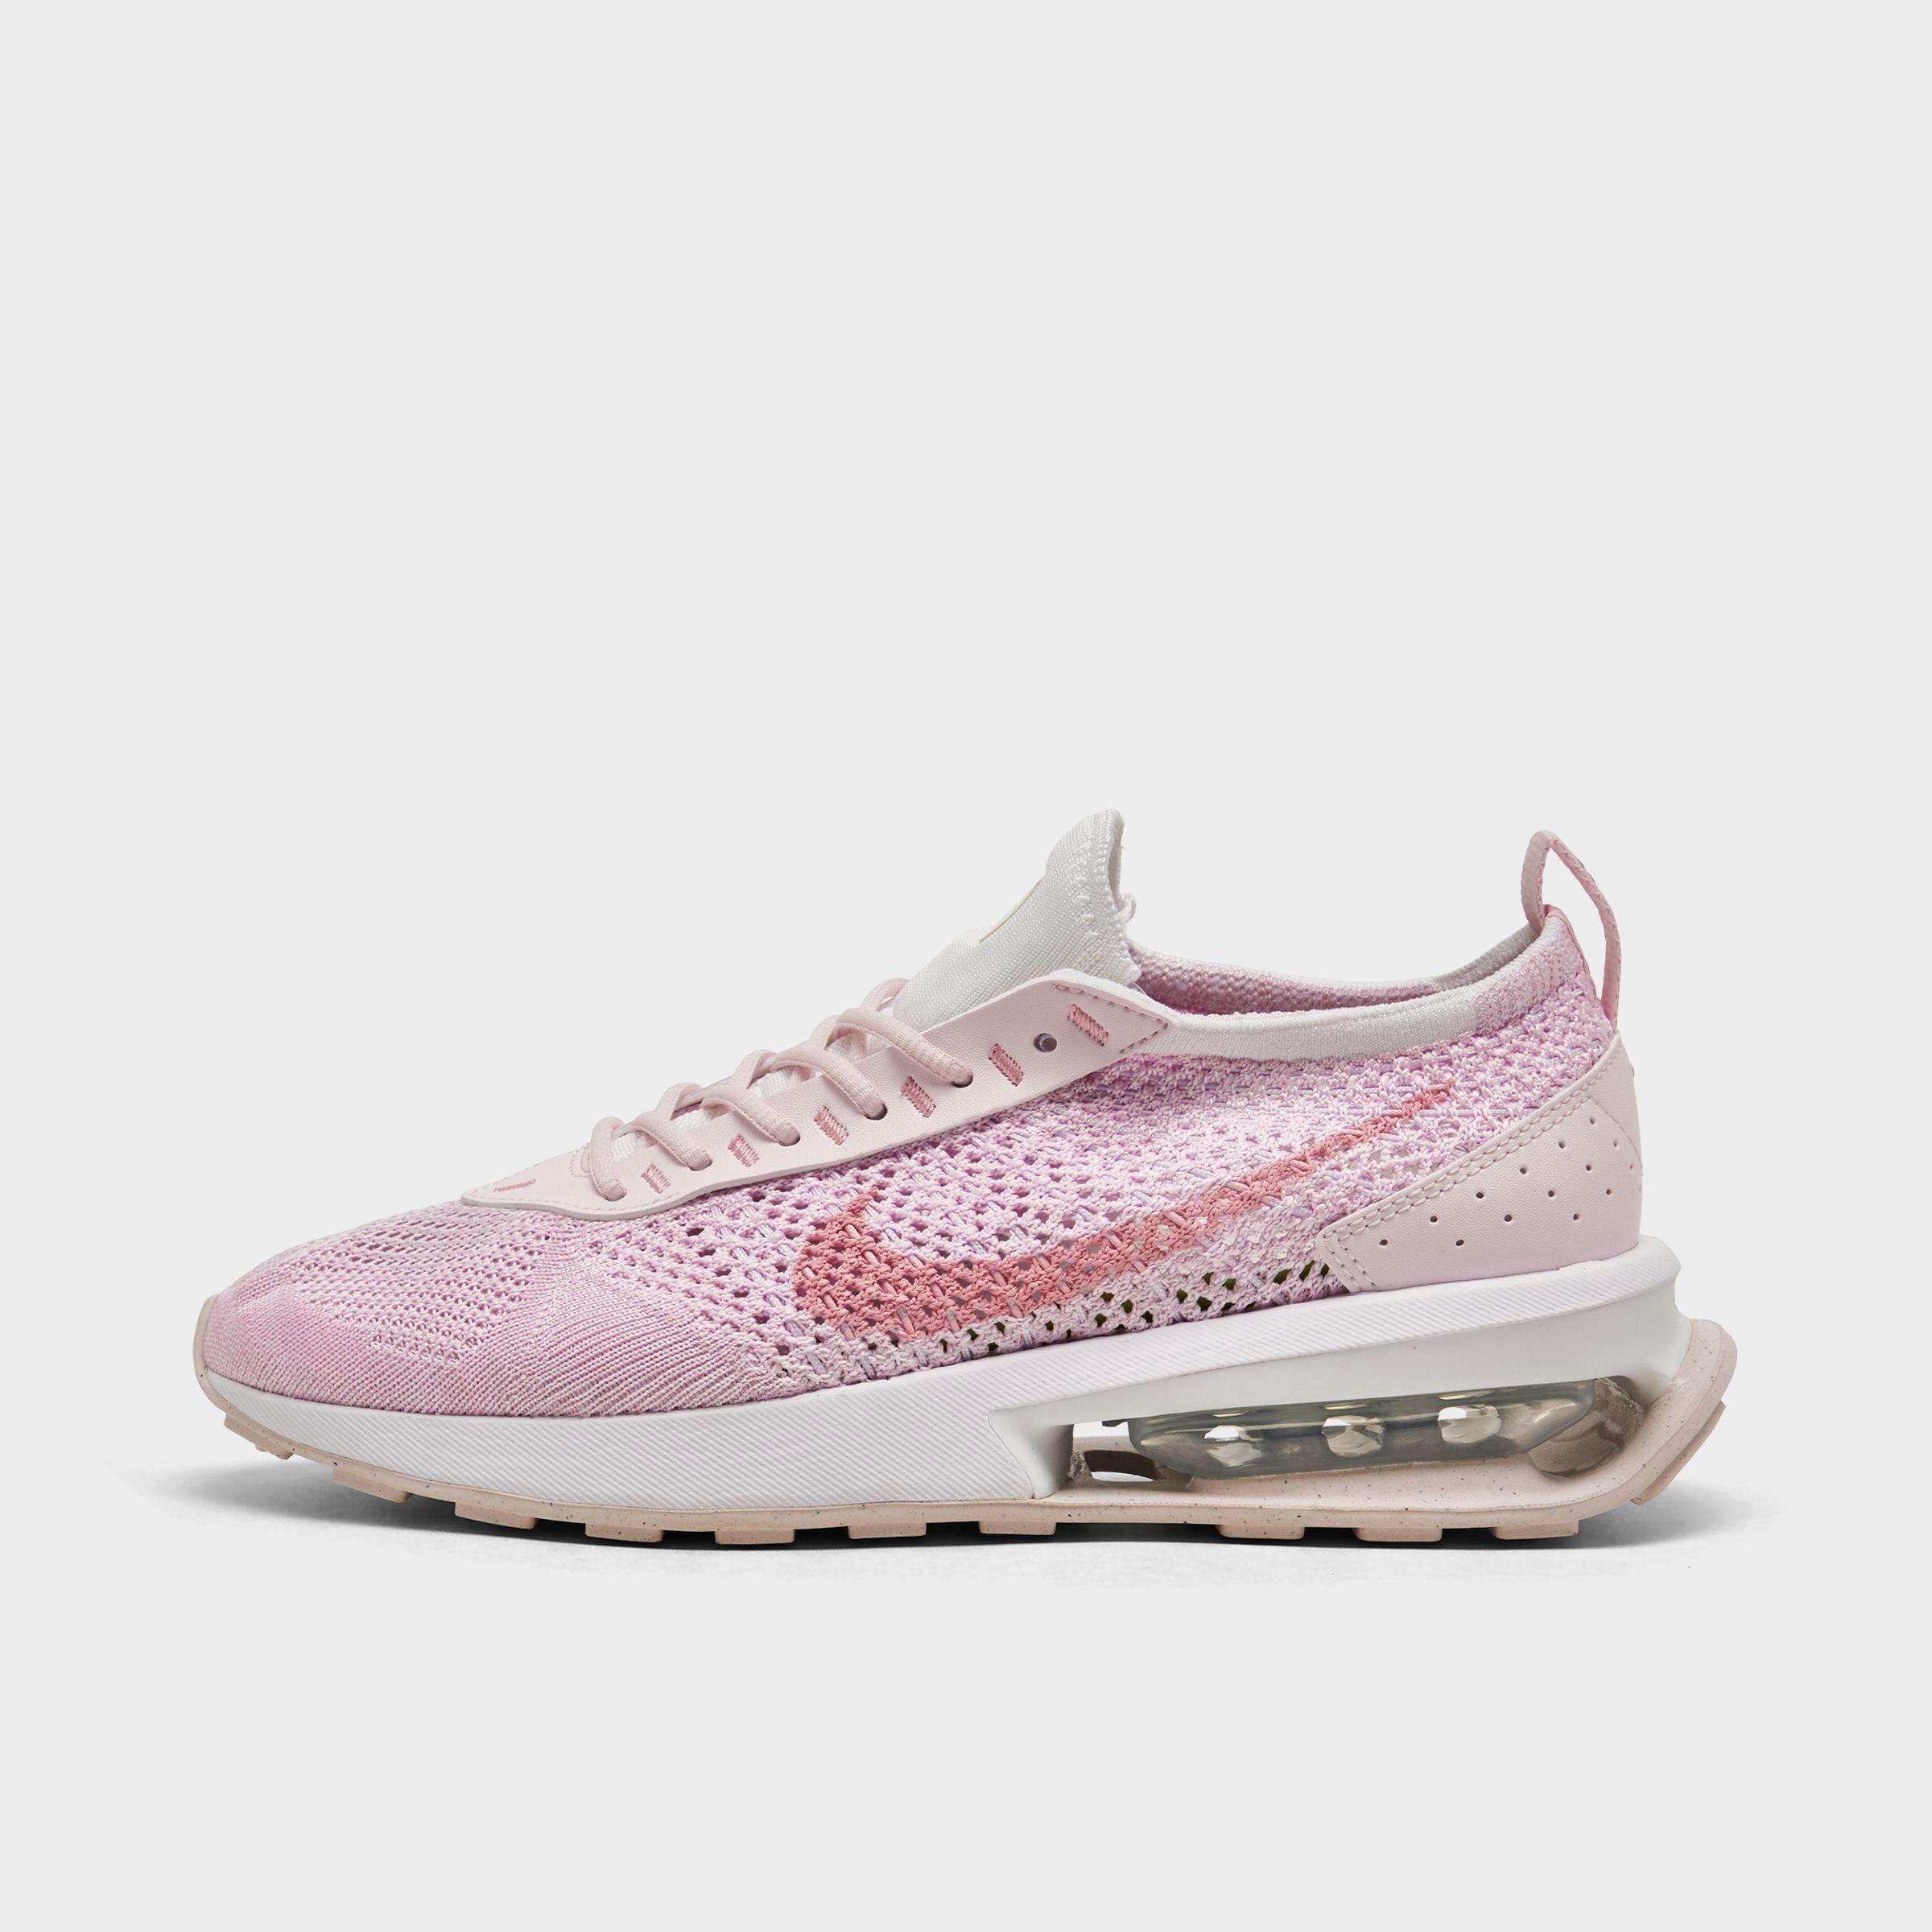 Nike Women's Air Max Flyknit Racer Casual Shoes In White/pearl Pink/football Grey/medium Soft Pink